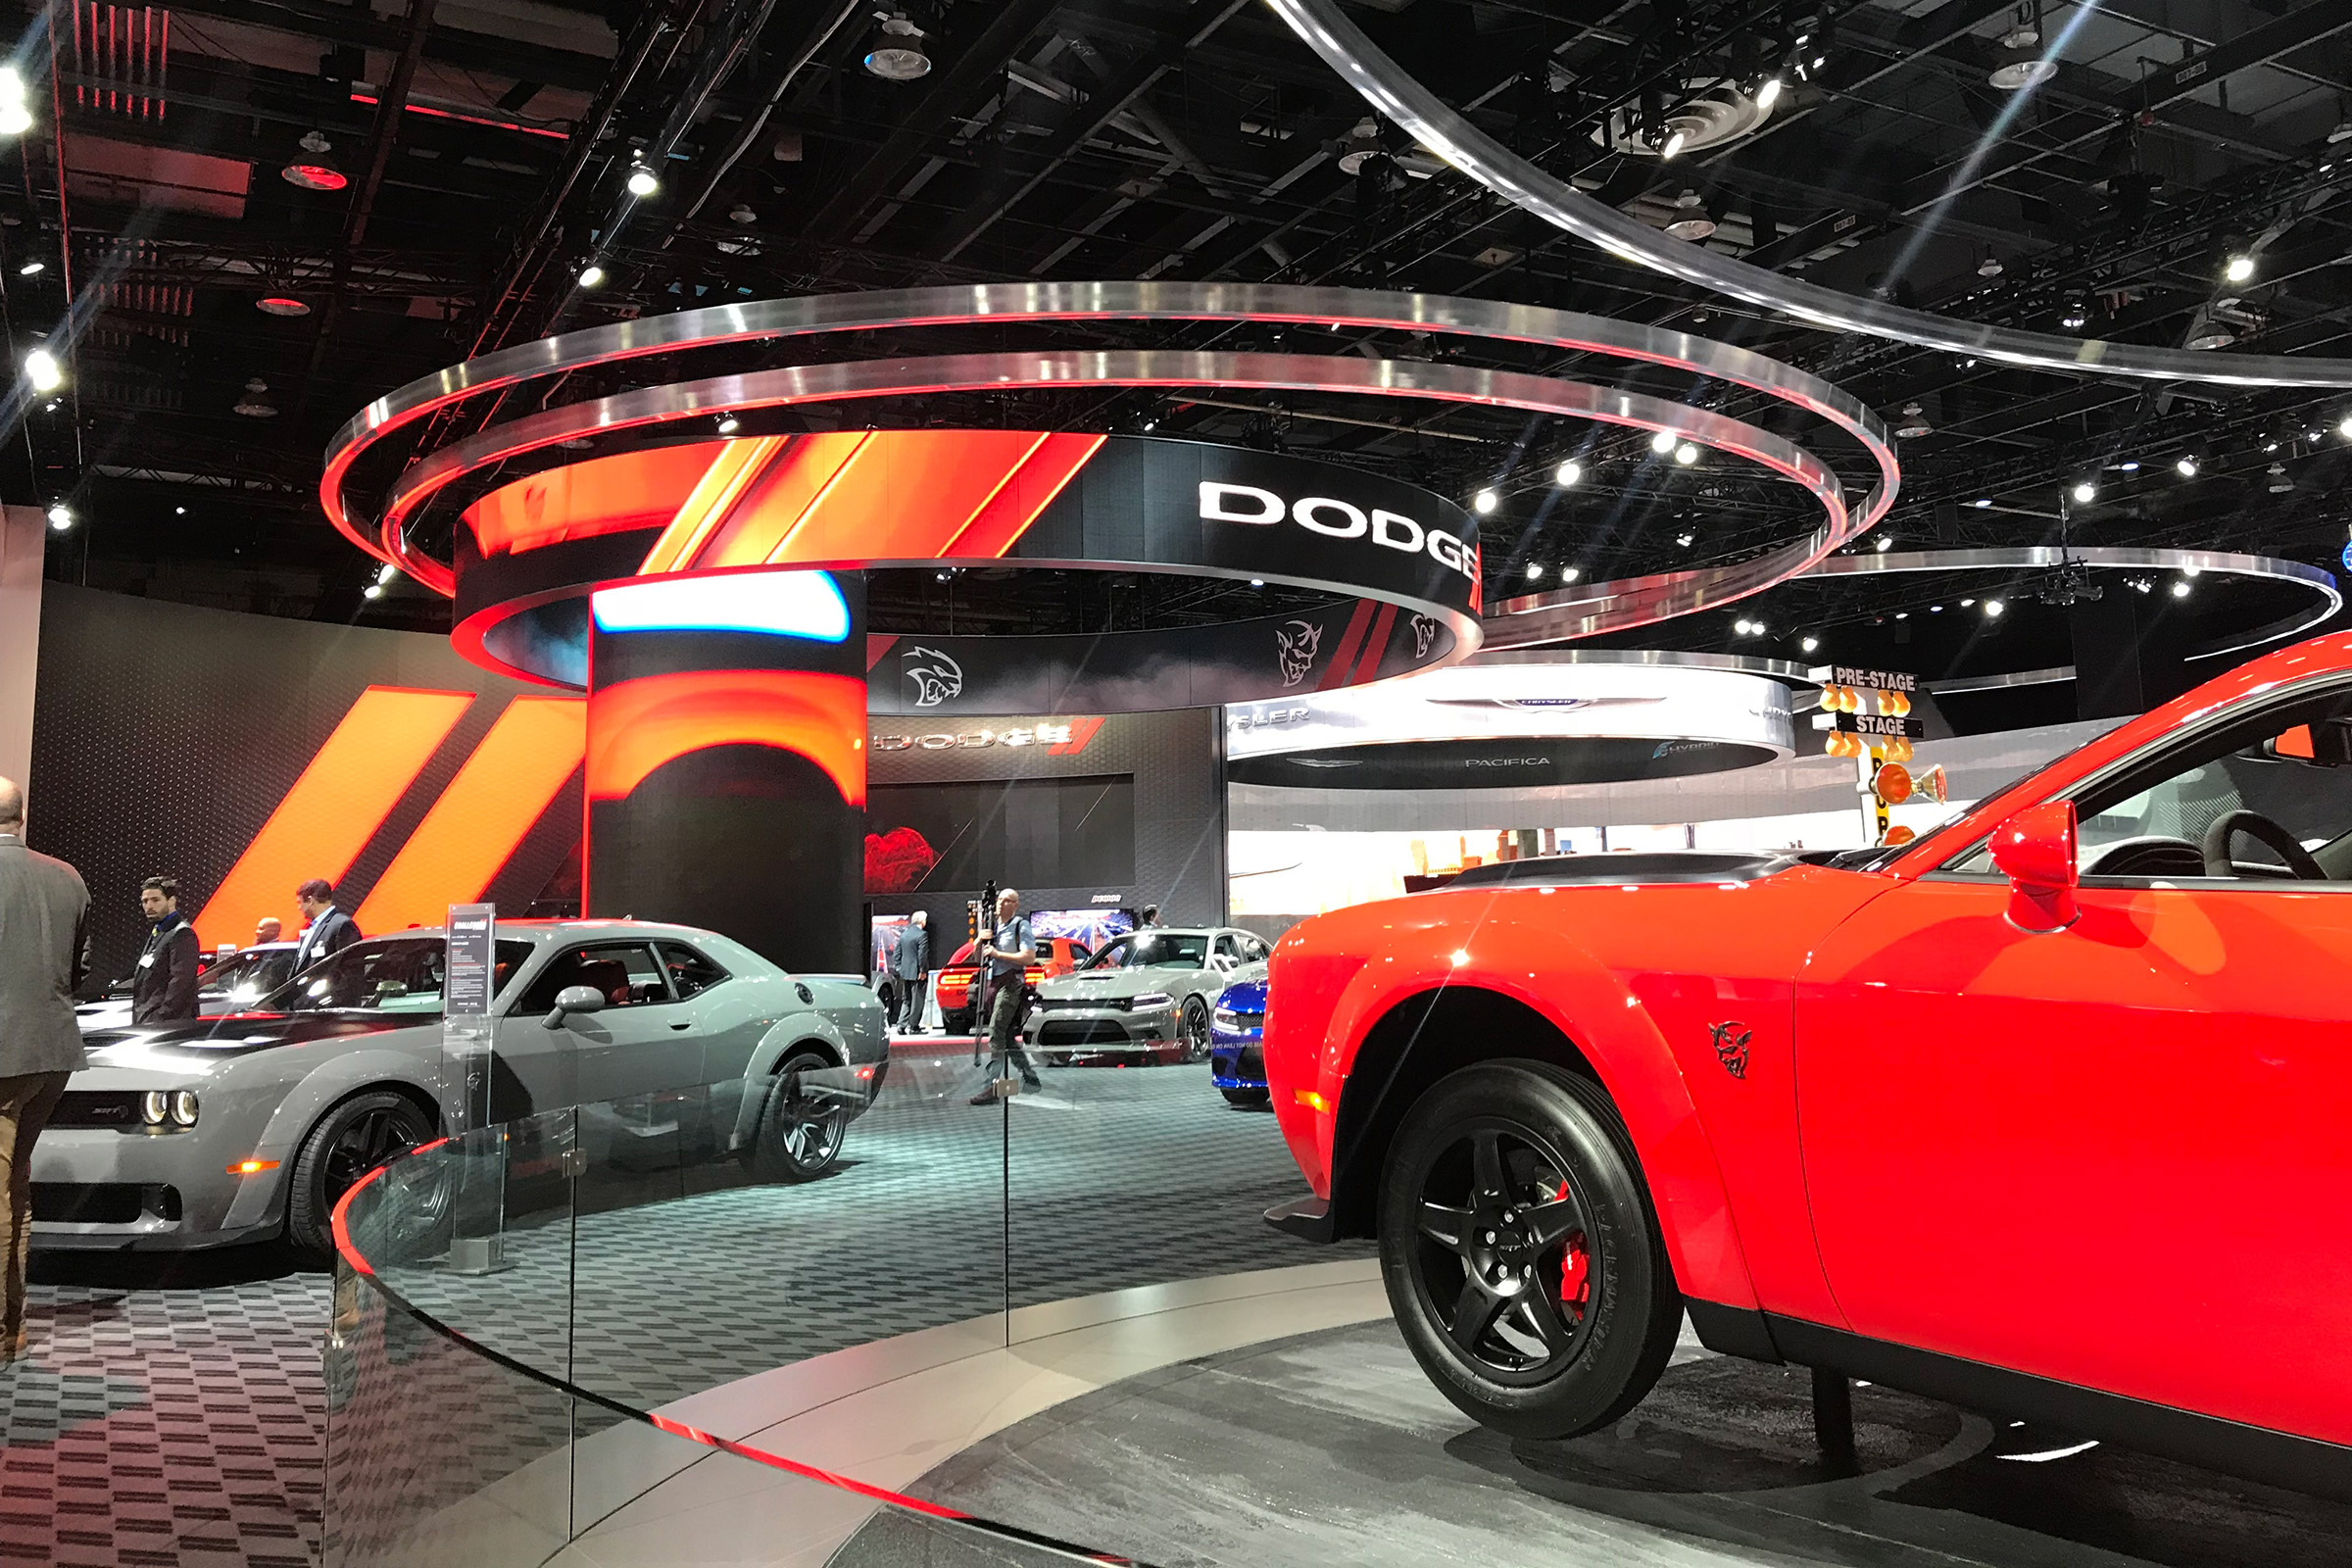 Detroit Motor Show 2018 key cars and news roundup Auto